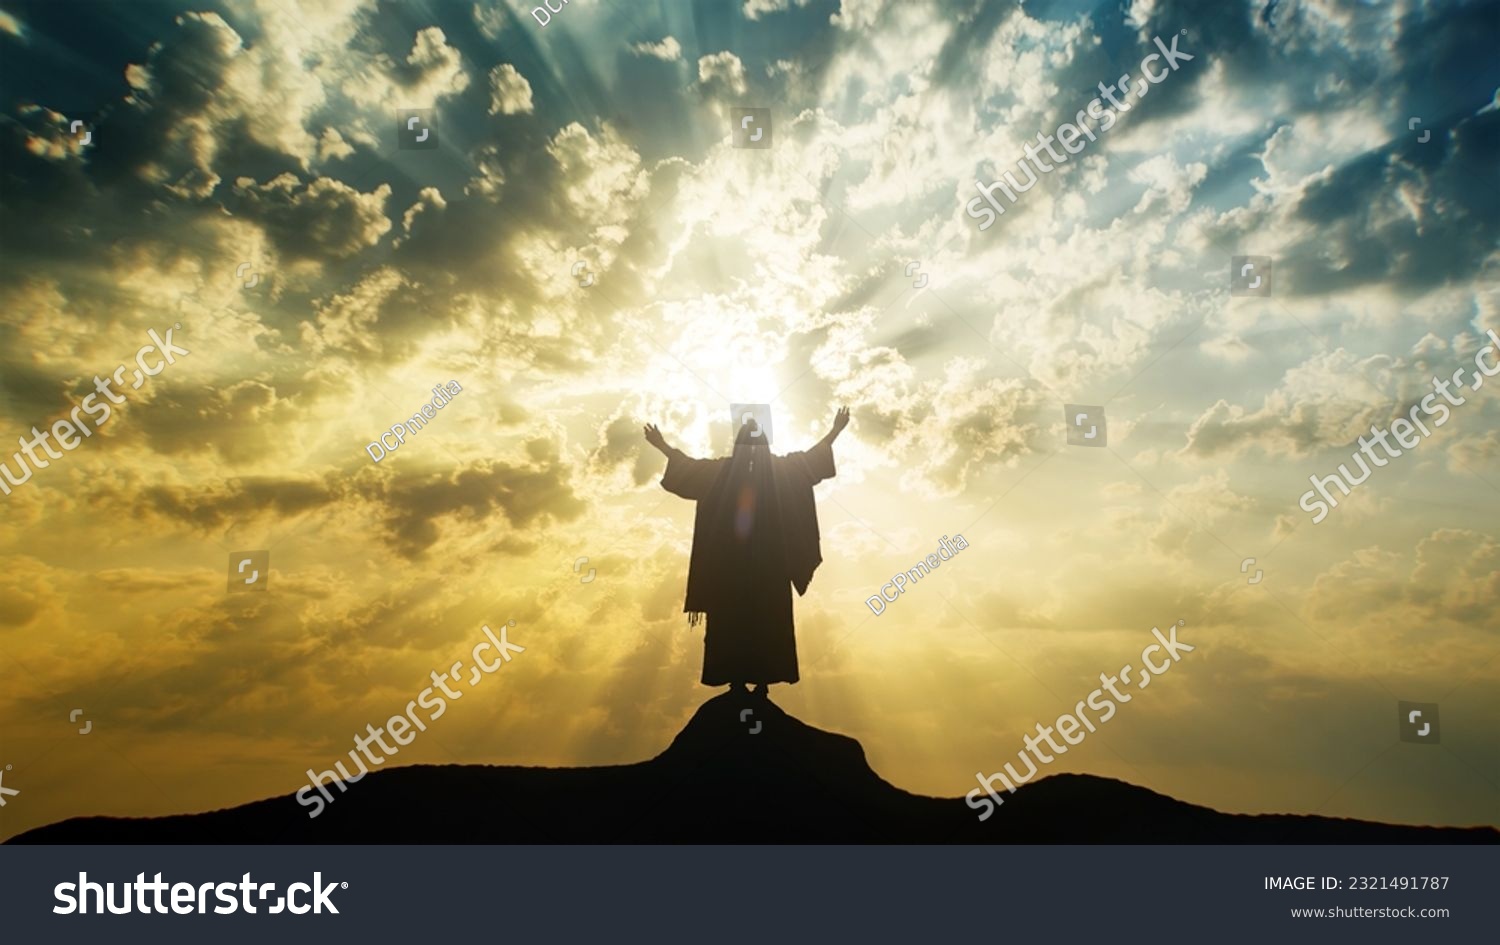 Silhouette of Jesus praying with raised hands on a mount with mystic clouds behind Him. #2321491787